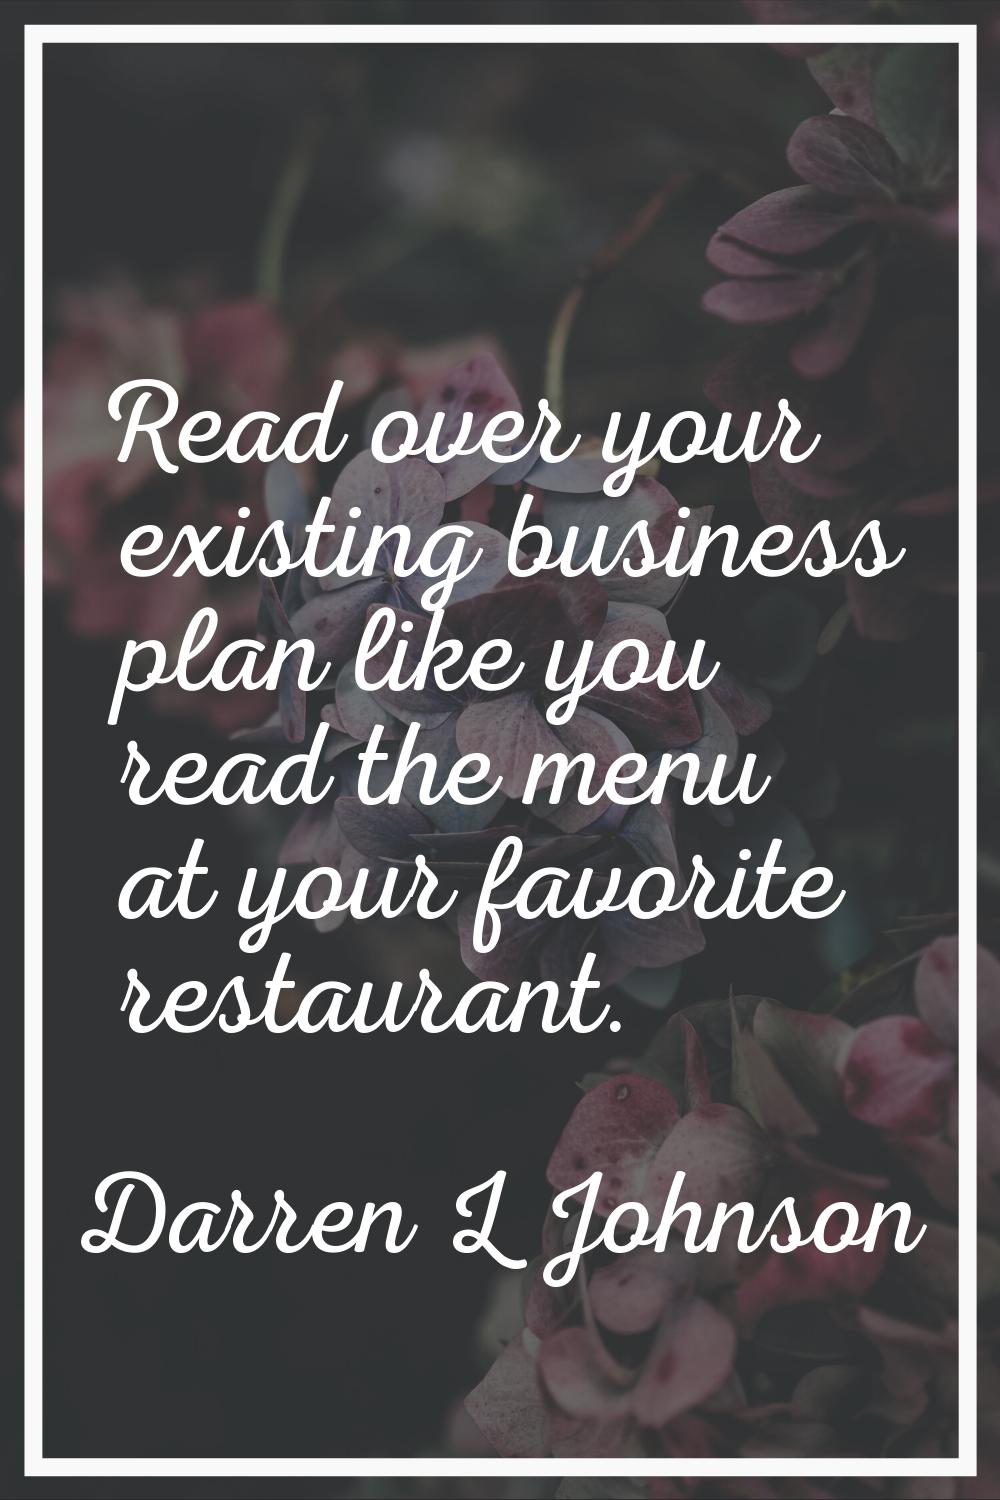 Read over your existing business plan like you read the menu at your favorite restaurant.